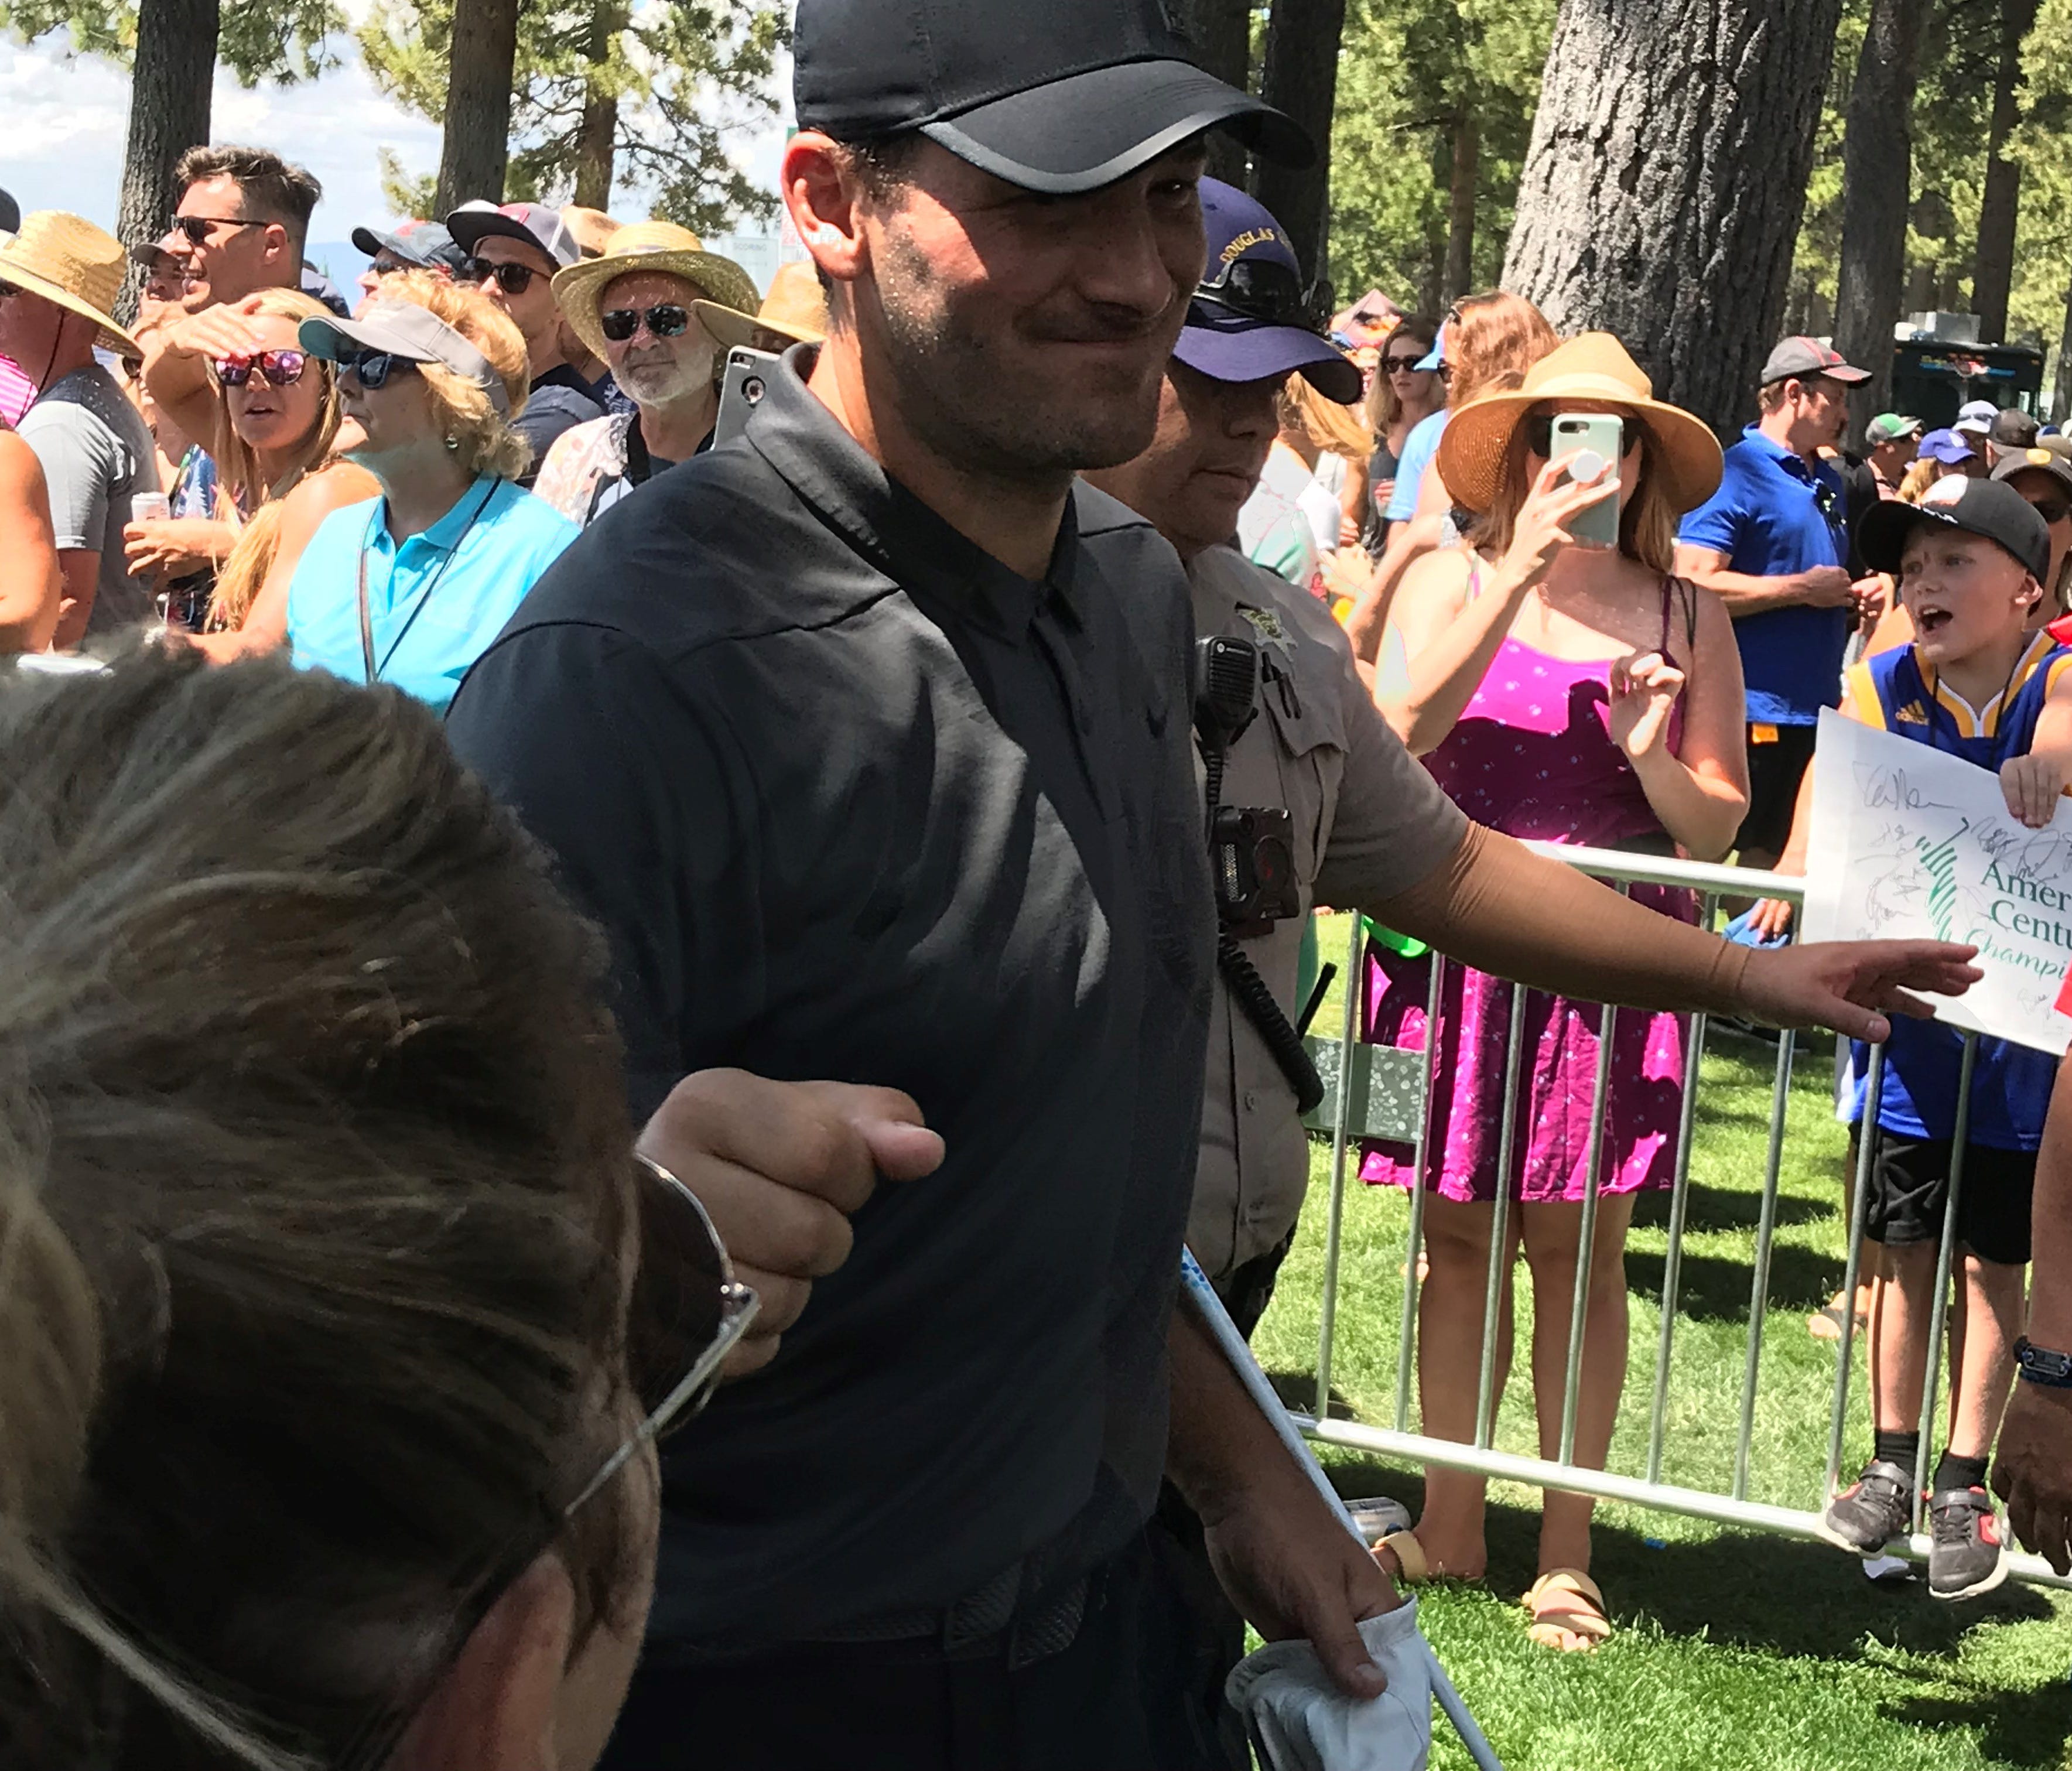 Tony Romo is in third with 44 points at the American Century Championship celebrity golf tournament at Edgewood Tahoe